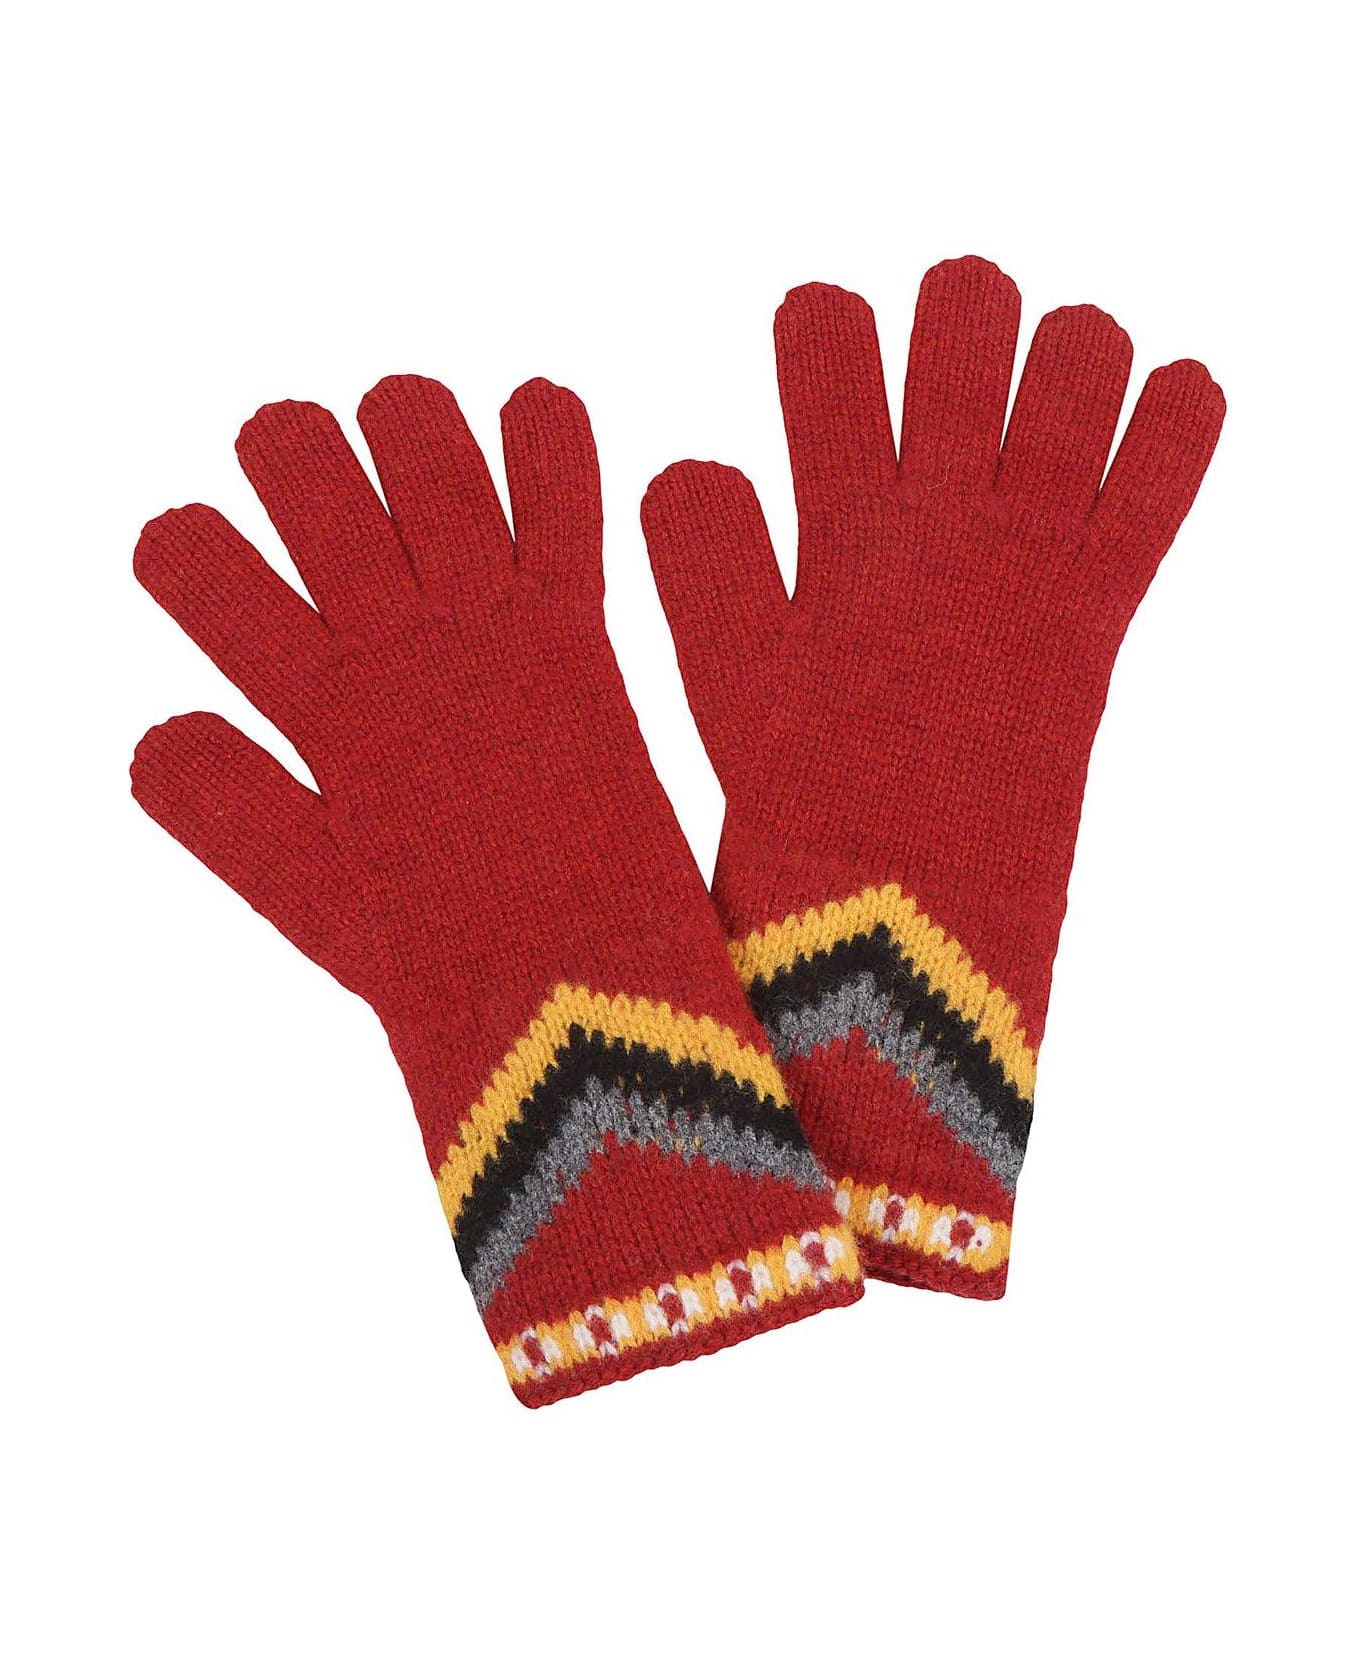 Alanui Detailed Knit Gloves - Red